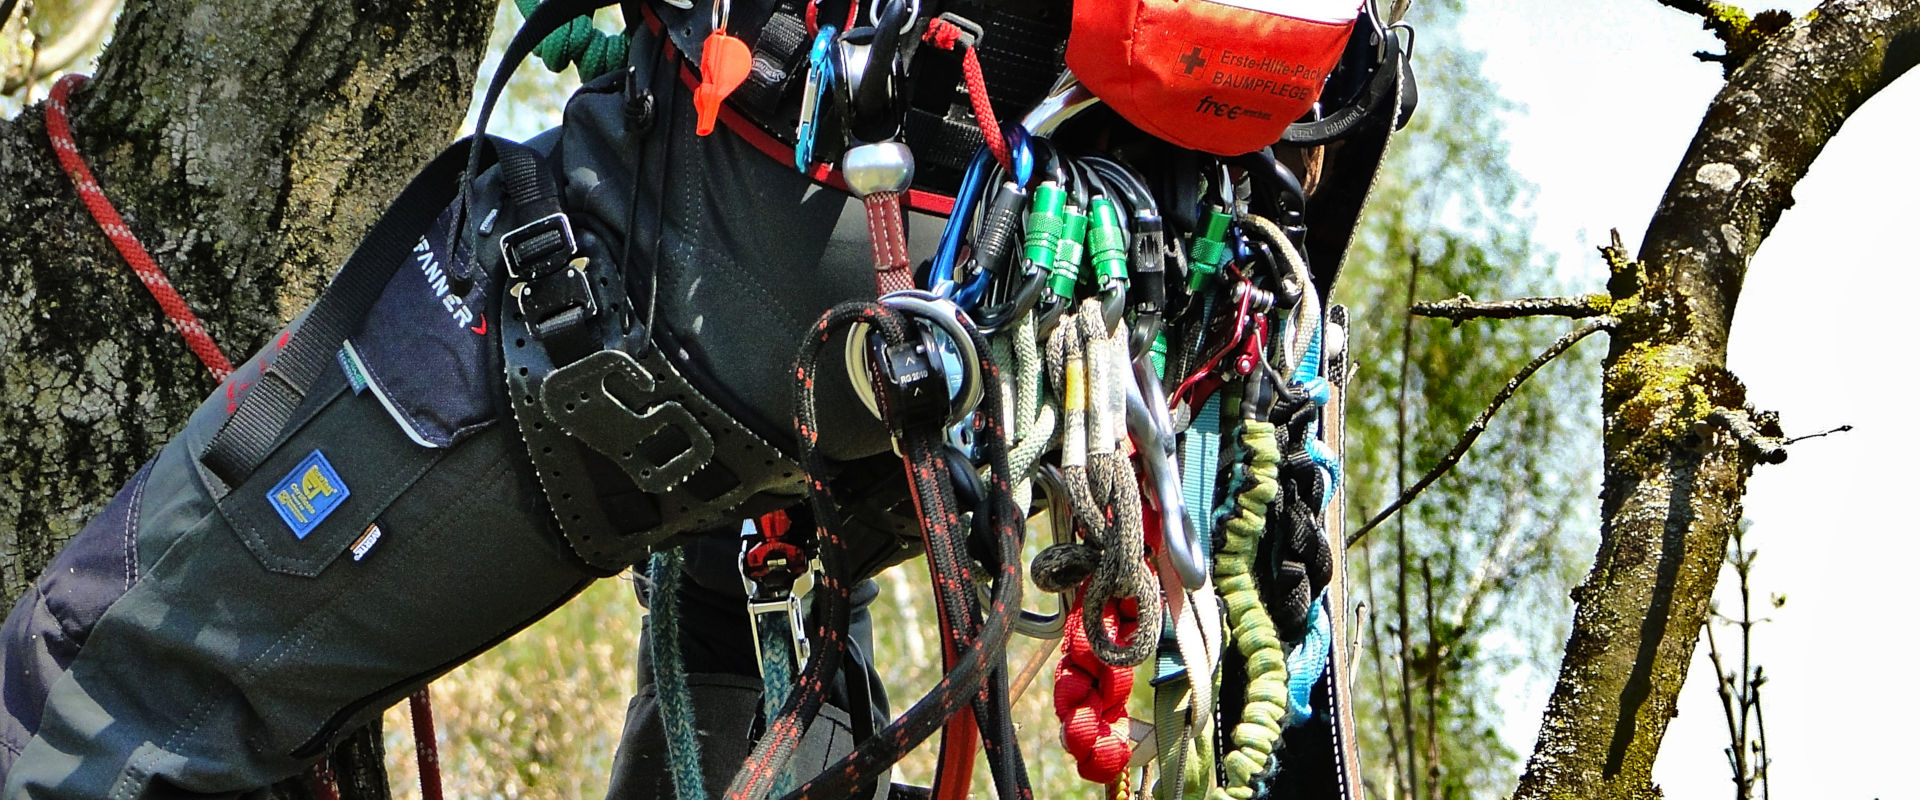 Freeworker Blog » Carabiners for tree care, tree climbing and rigging